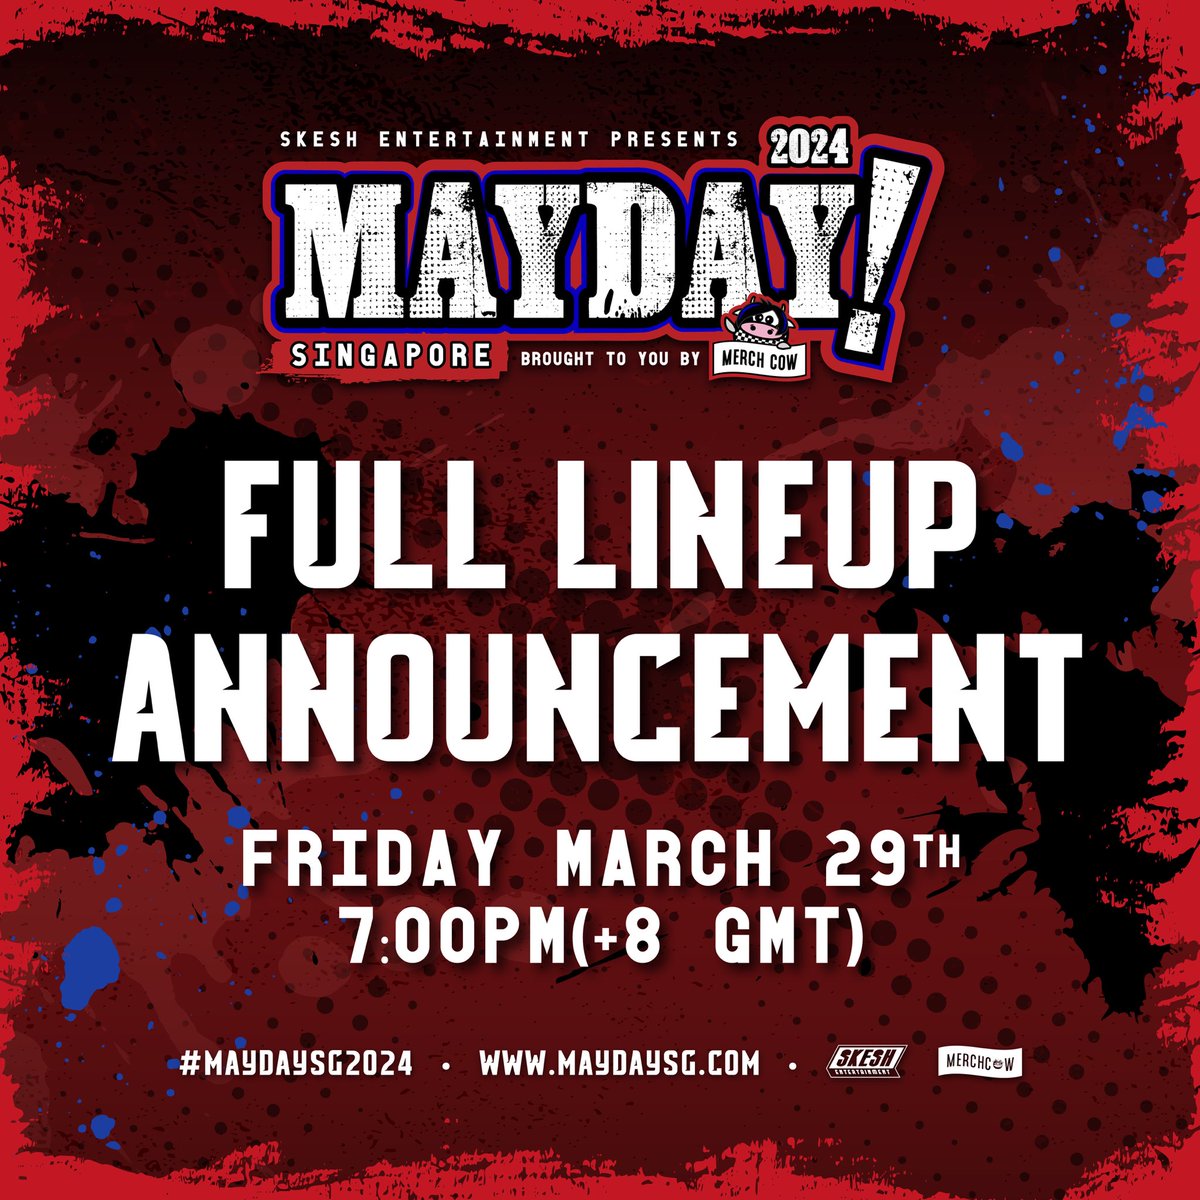 Full lineup announcement for this year's @maydaysingapore festival out this Friday! #MaydaySG2024 #SkeshEntertainment